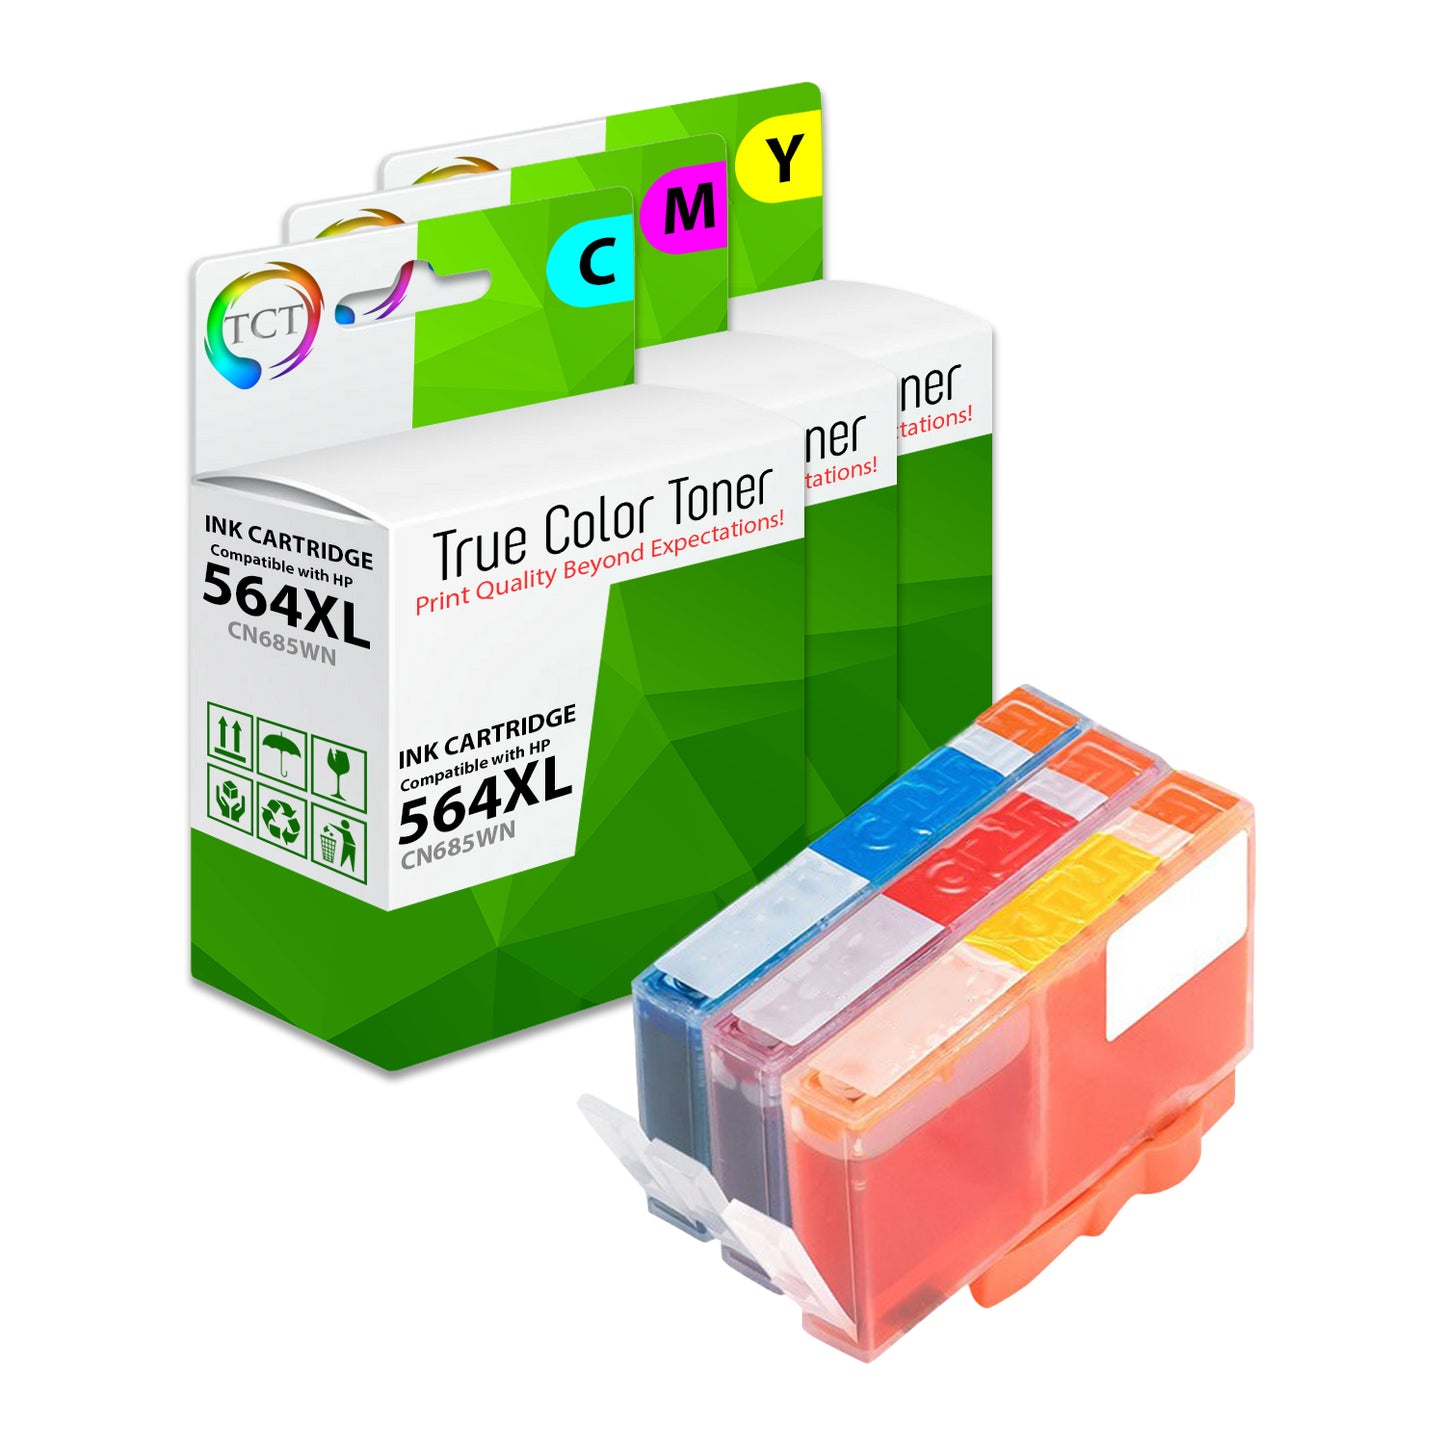 TCT Compatible Ink Cartridge Replacement for the HP 564XL Series - 3 Pack (C, M, Y)